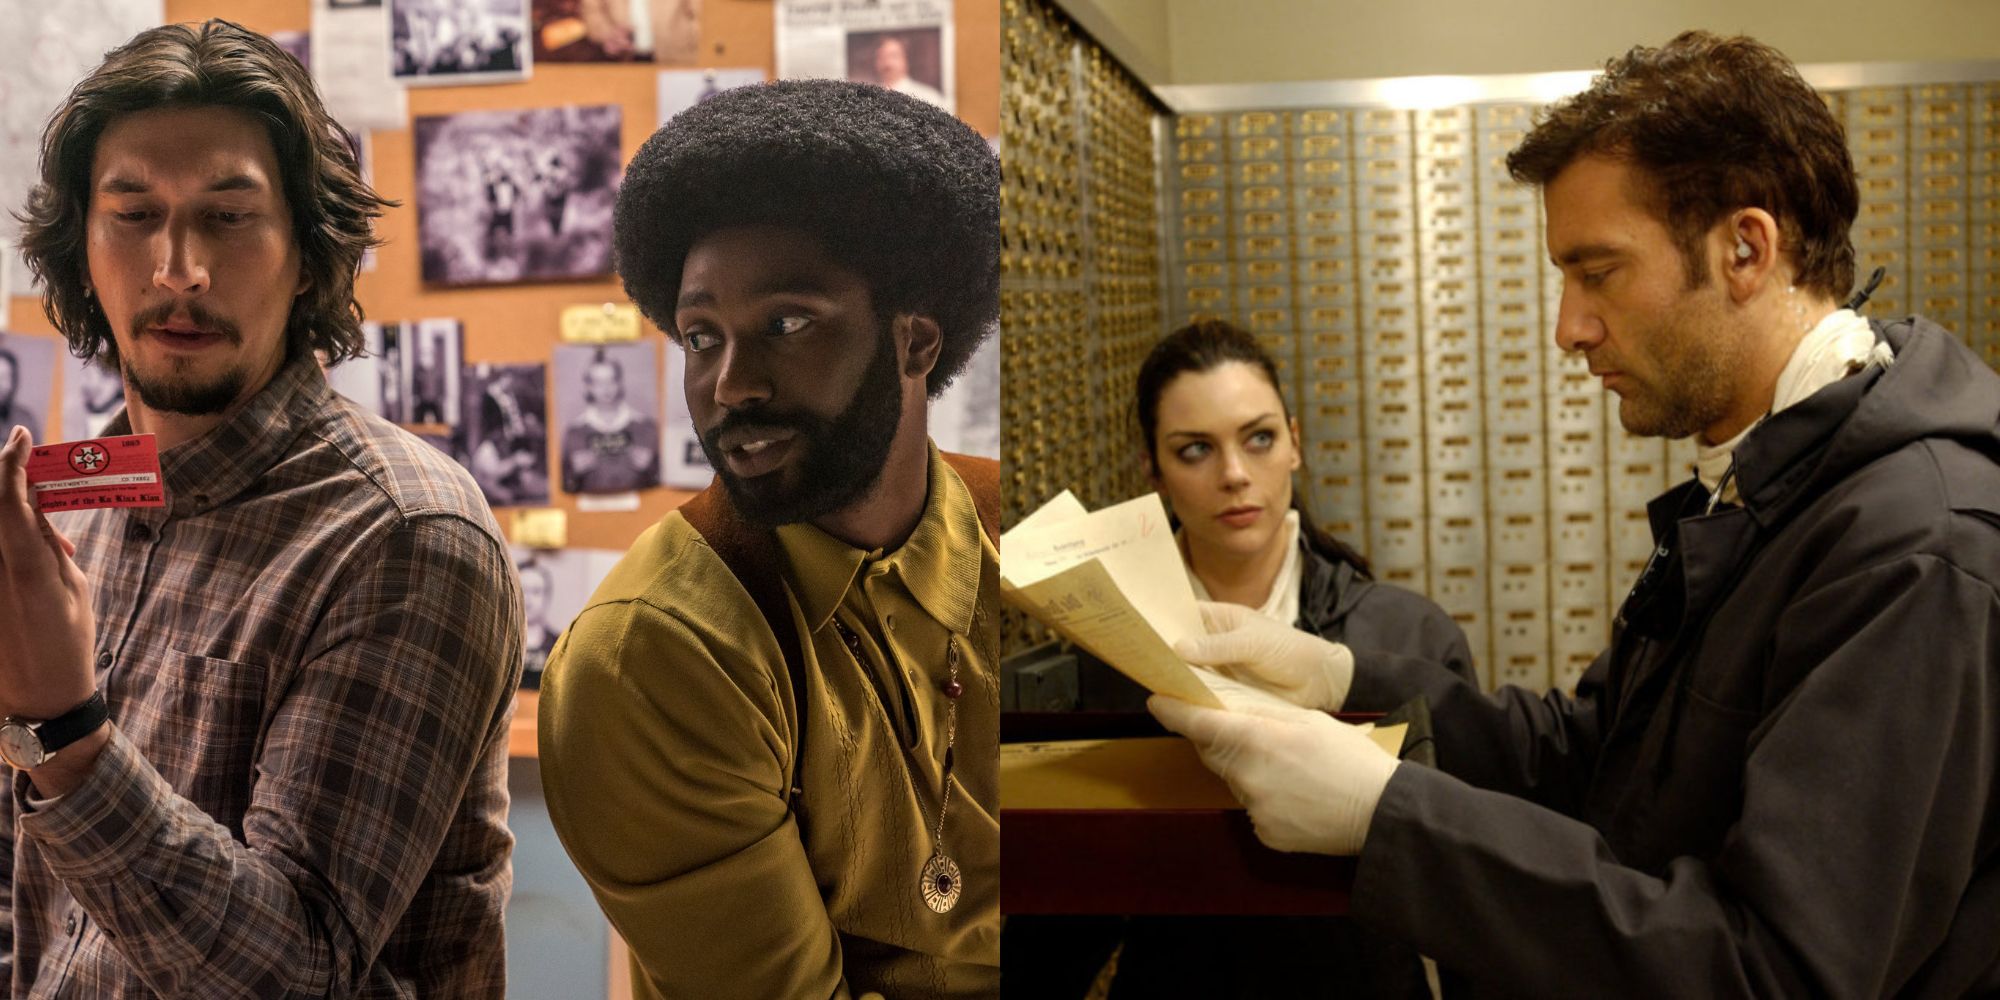 Split image showing characters from BlackKklansman and Inside Man.